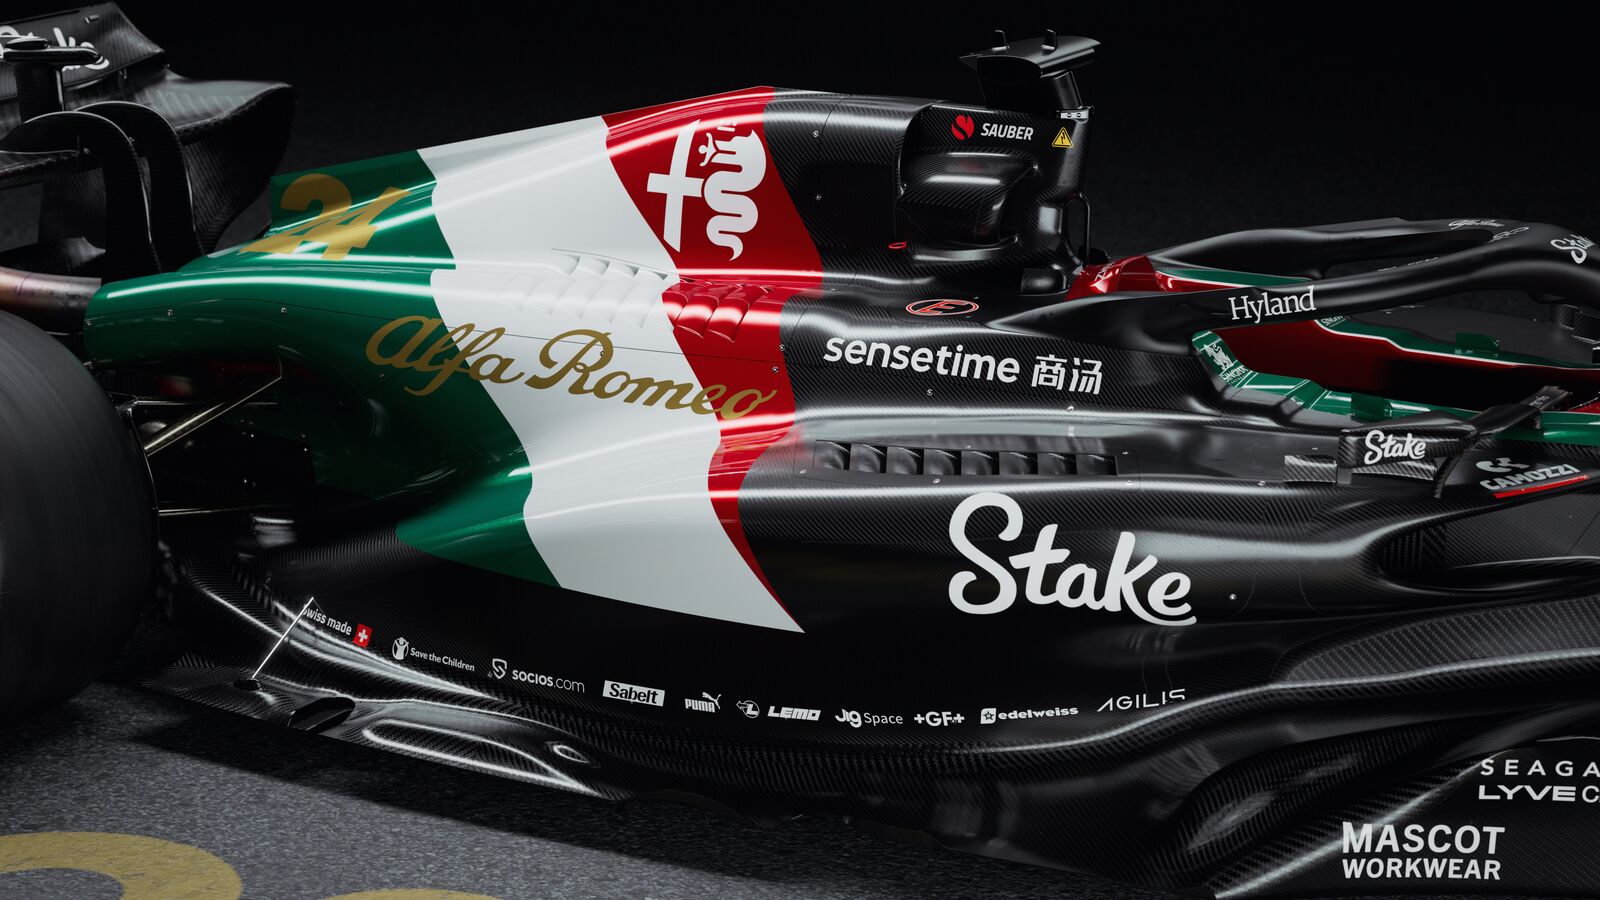 Alfa Romeo F1 Team Stake will pay tribute to the launch of Alfa Romeo’s latest fuoriserie car, the new 33 Stradale, with a head-turning livery for its C43 cars at the Italian Grand Prix